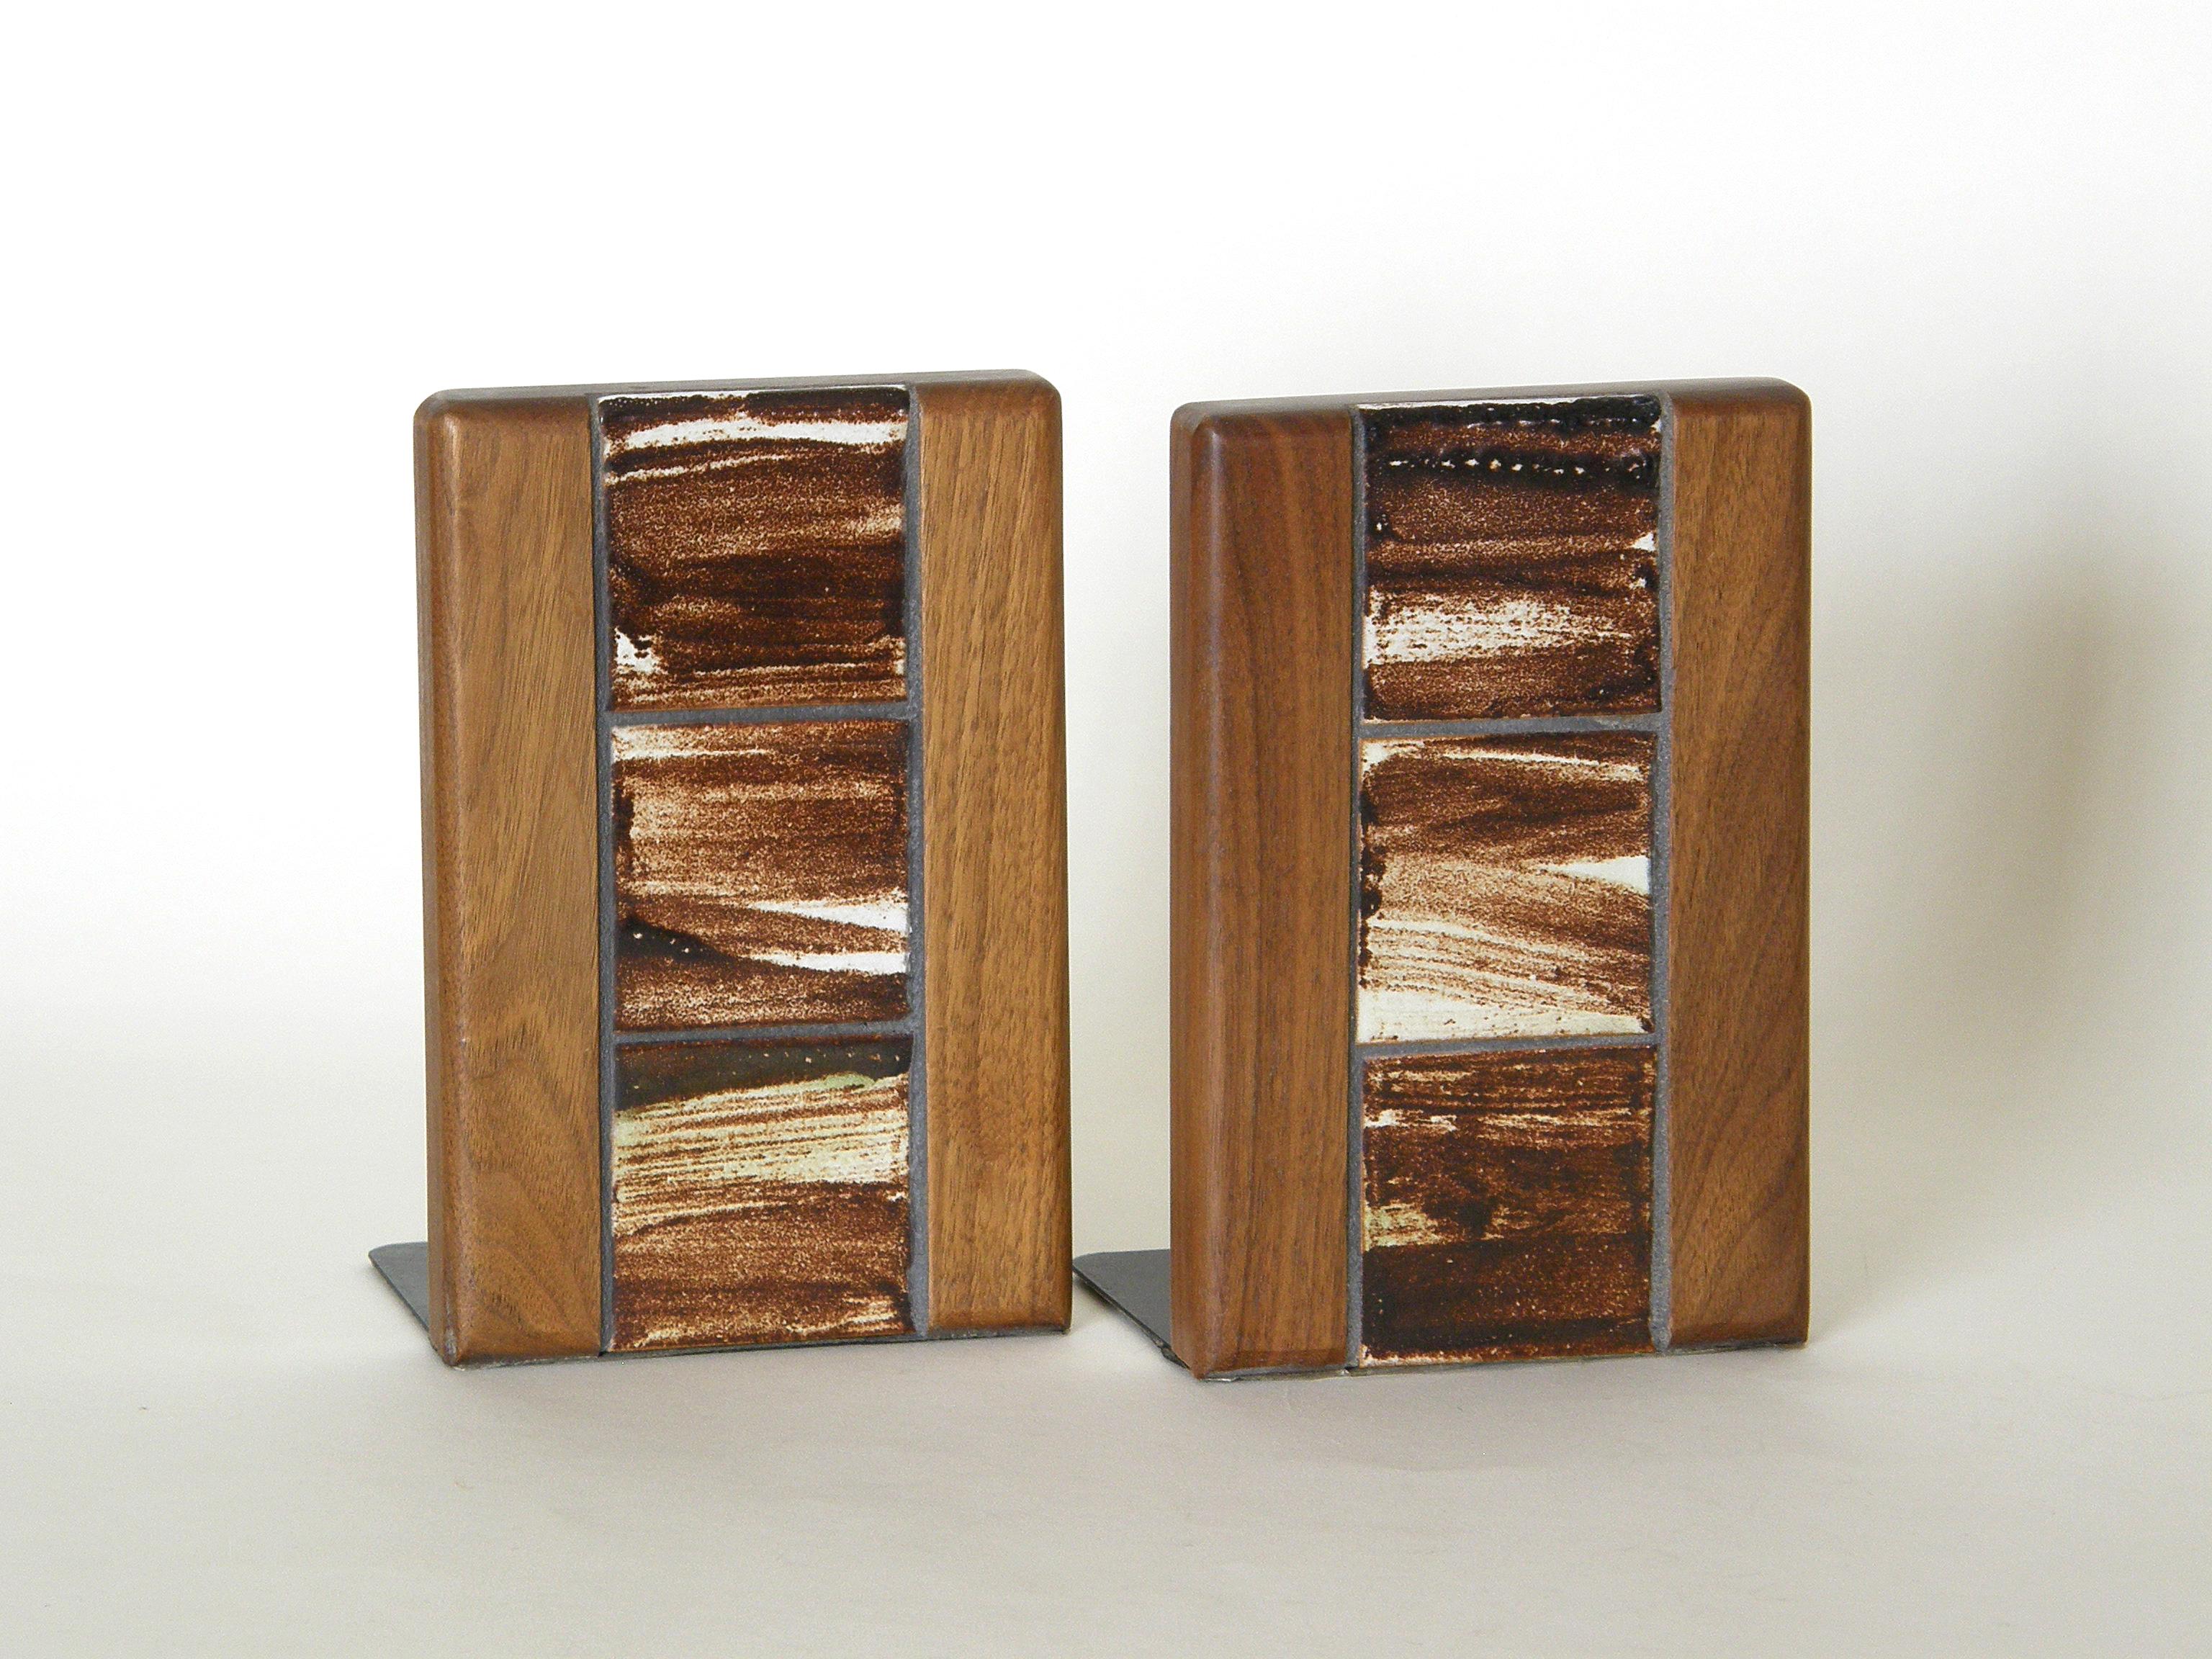 These ceramic tile and walnut bookends were designed and made by Jane and Gordon Martz for Marshall Studios. The rectangular forms are softened by the loose brush strokes in the glaze and the grain in the wood. The two materials complement each